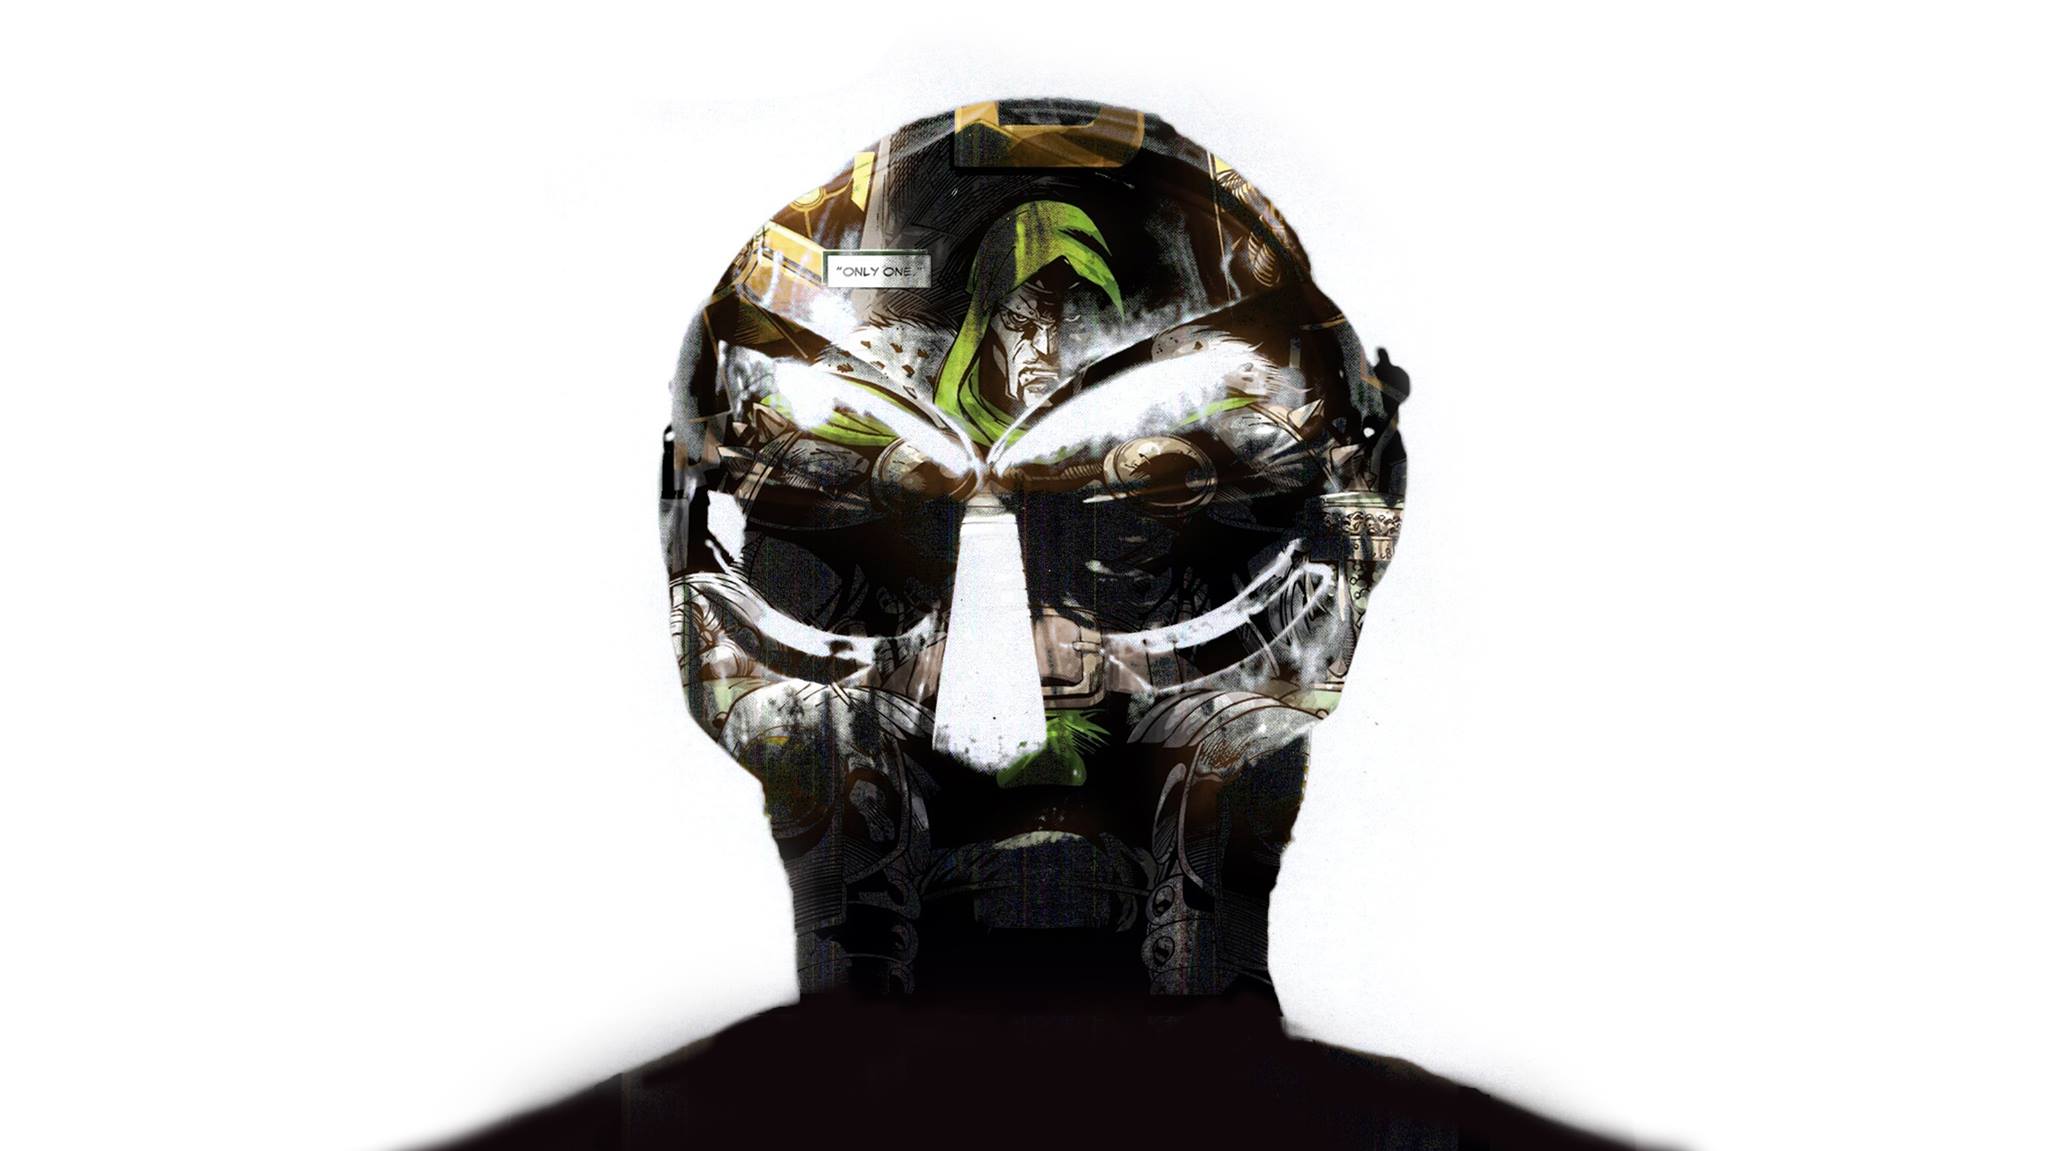 An MF DOOM wallpaper I made. (1920x1080). BEST WALLPAPERS ON Your